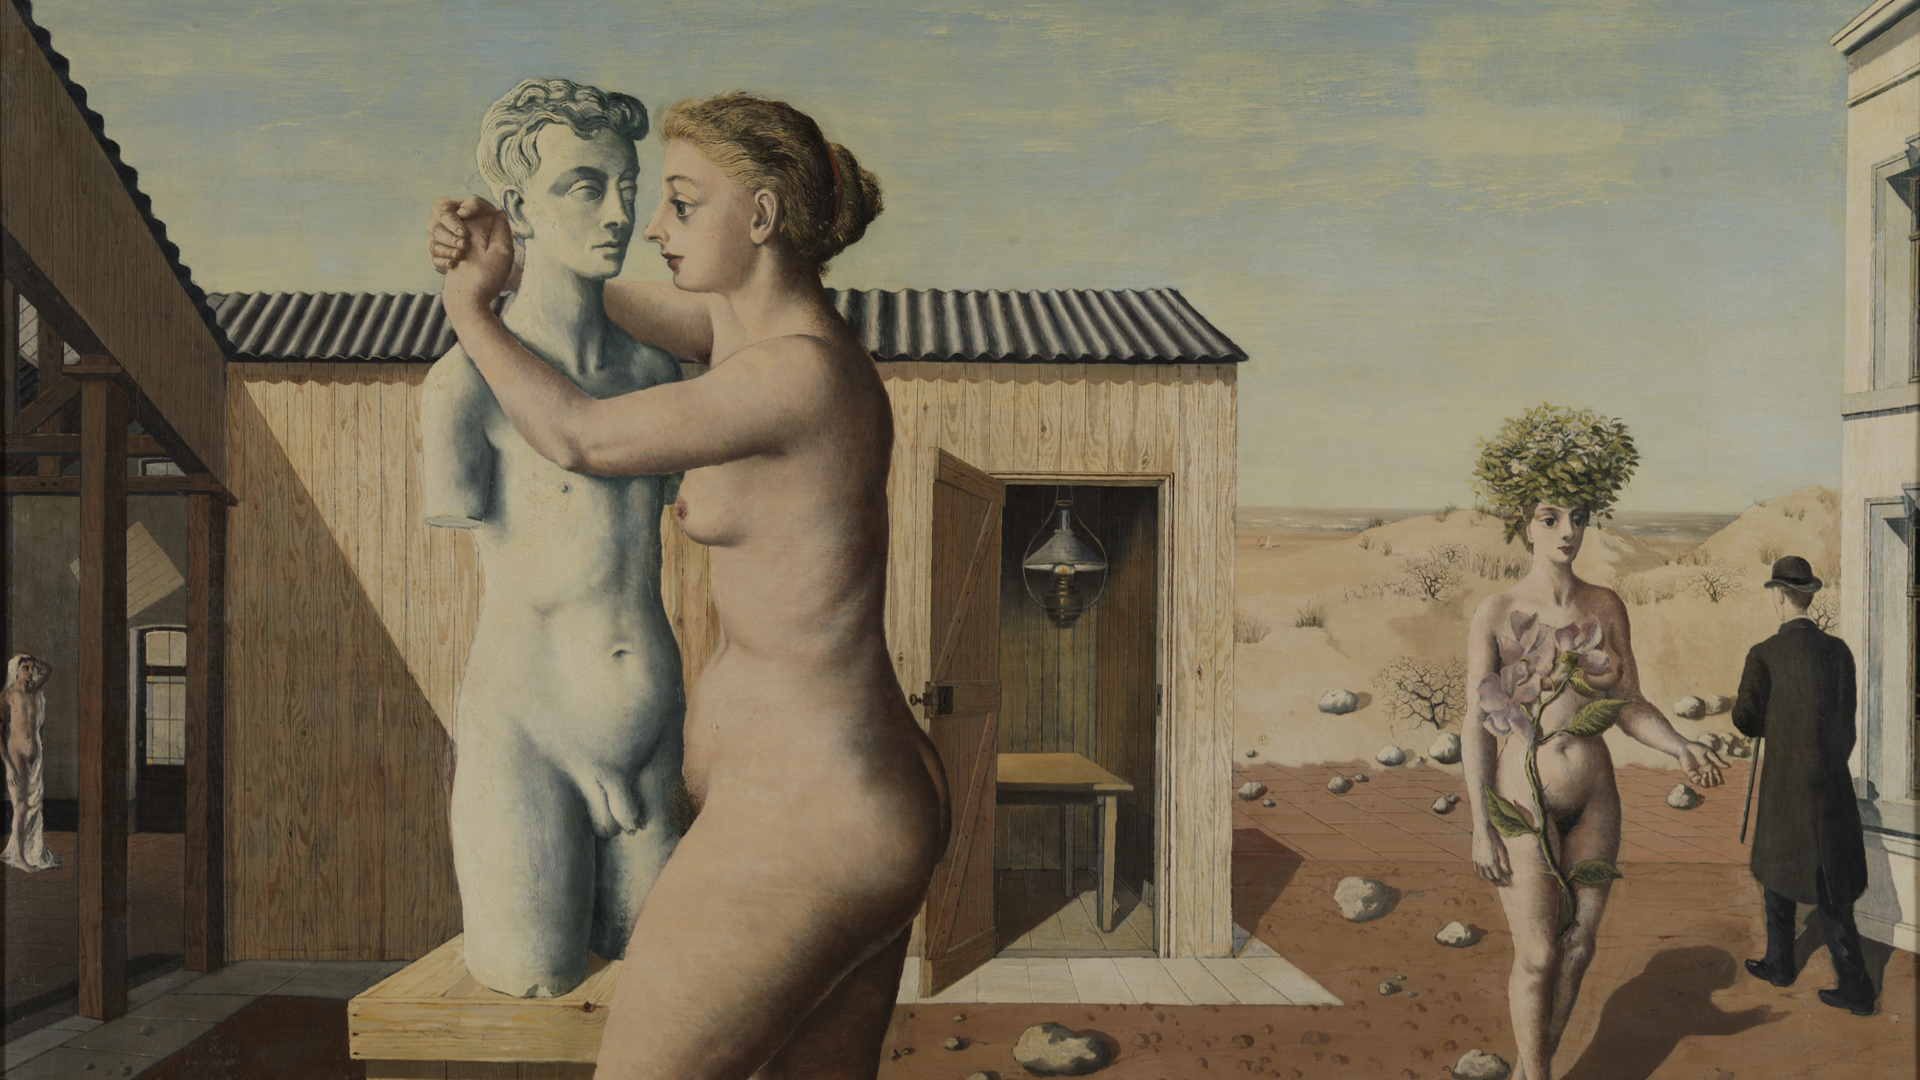 100 years of Surrealism at the Royal Museums of Fine Arts